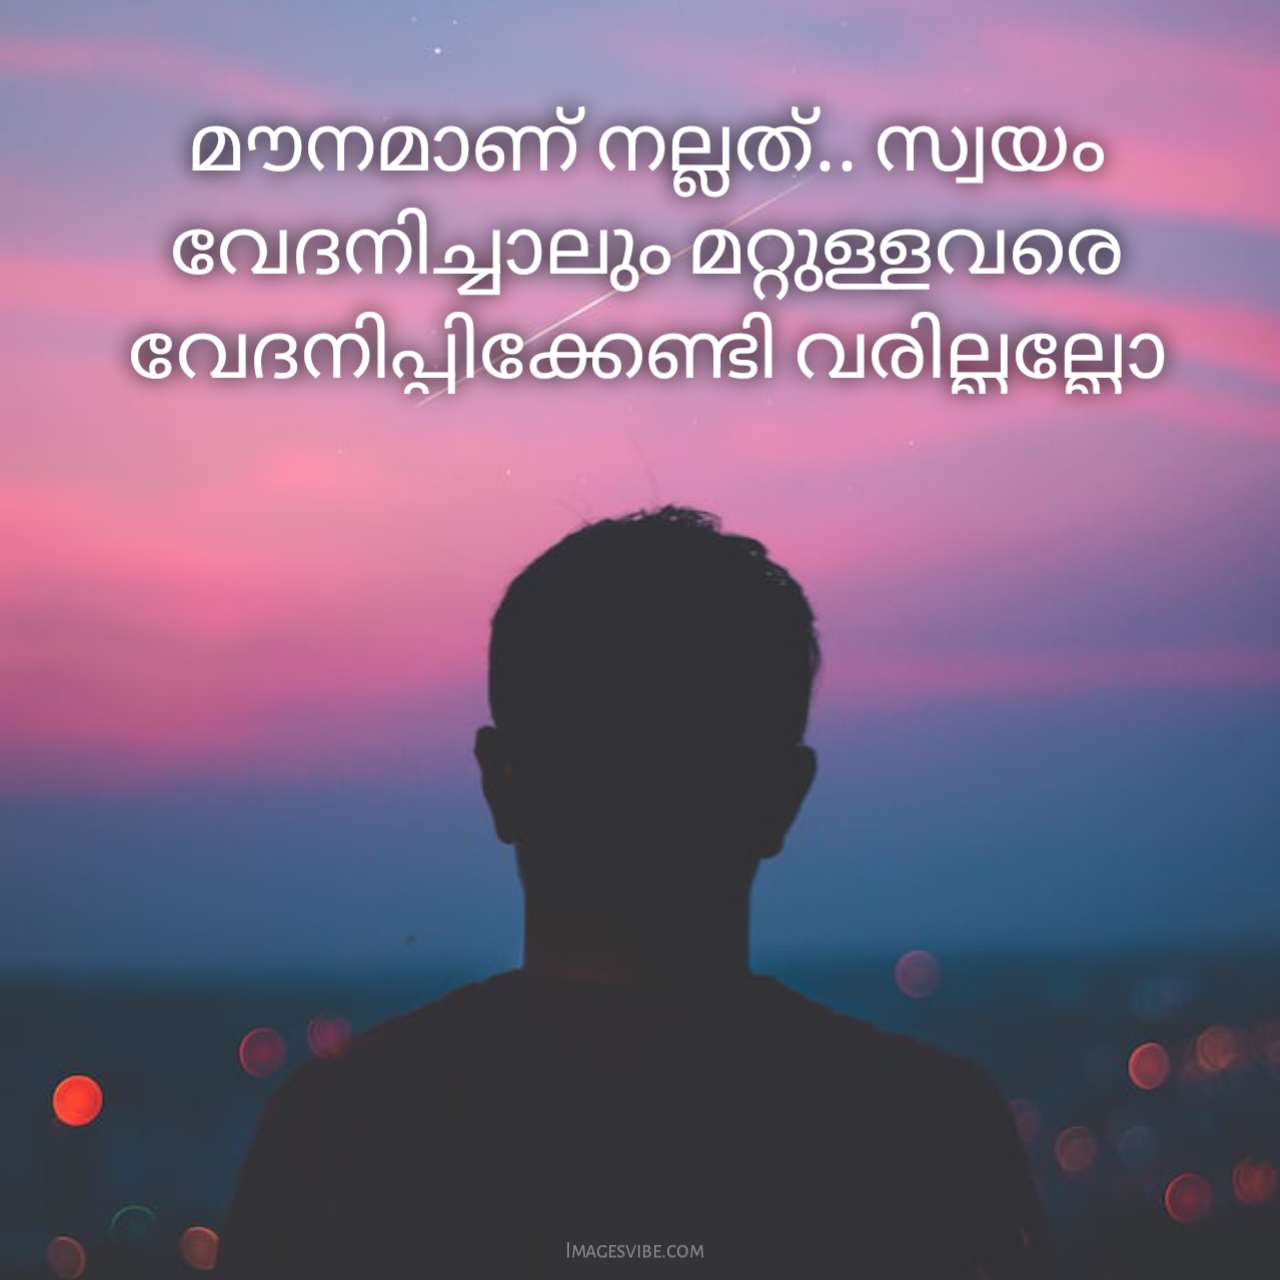 Best 50+ Feeling Malayalam Quotes & Images - Images Vibe